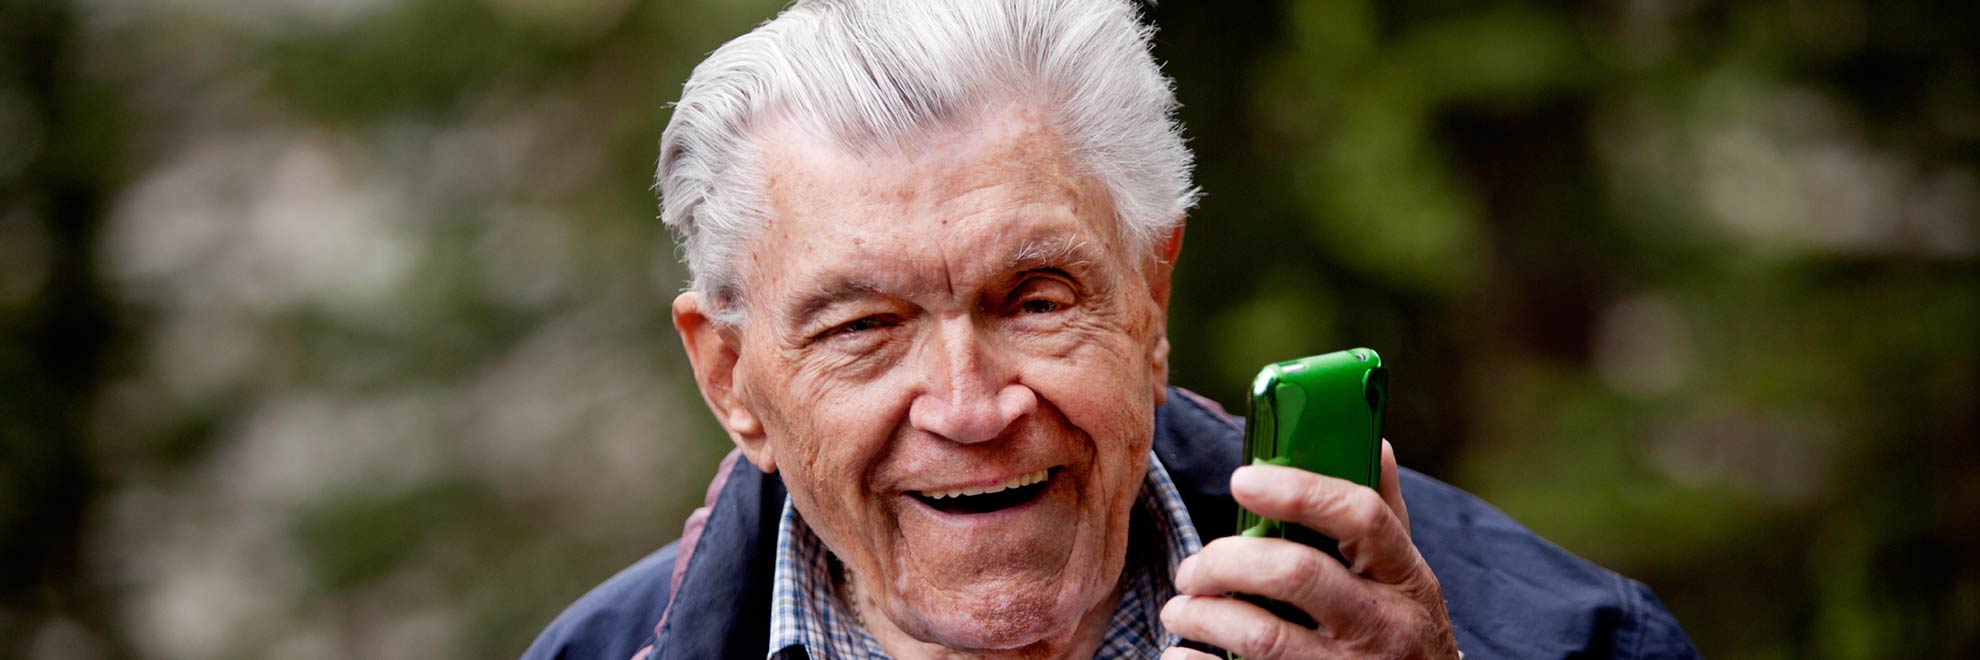 old man with mobile phone